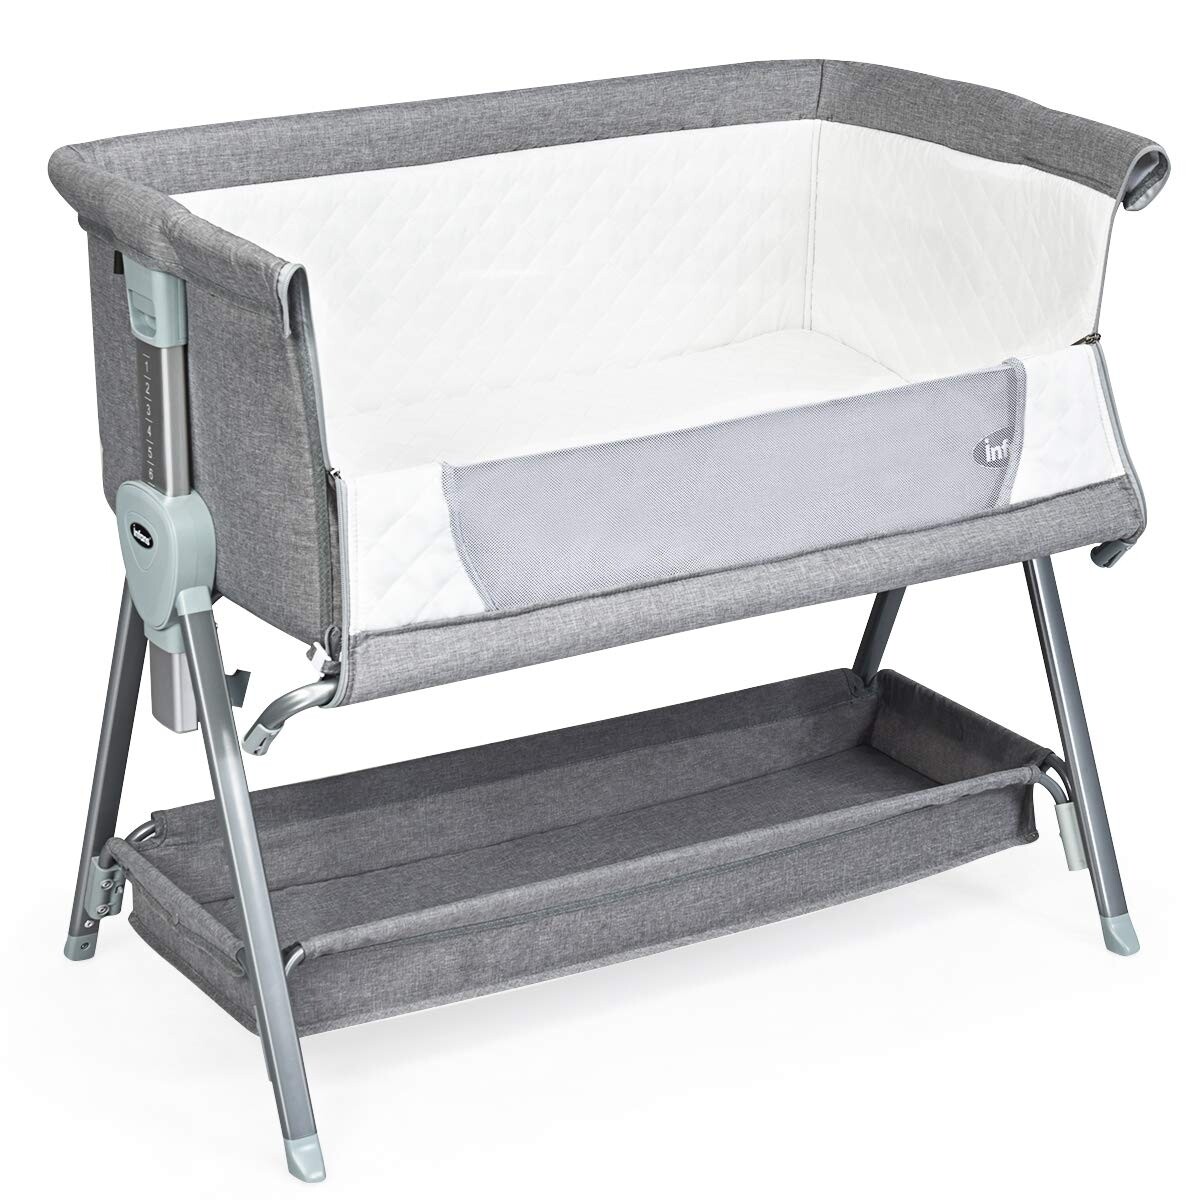 Adjustable Baby Bedside Crib with Large Storage-Gray - Color: Gray